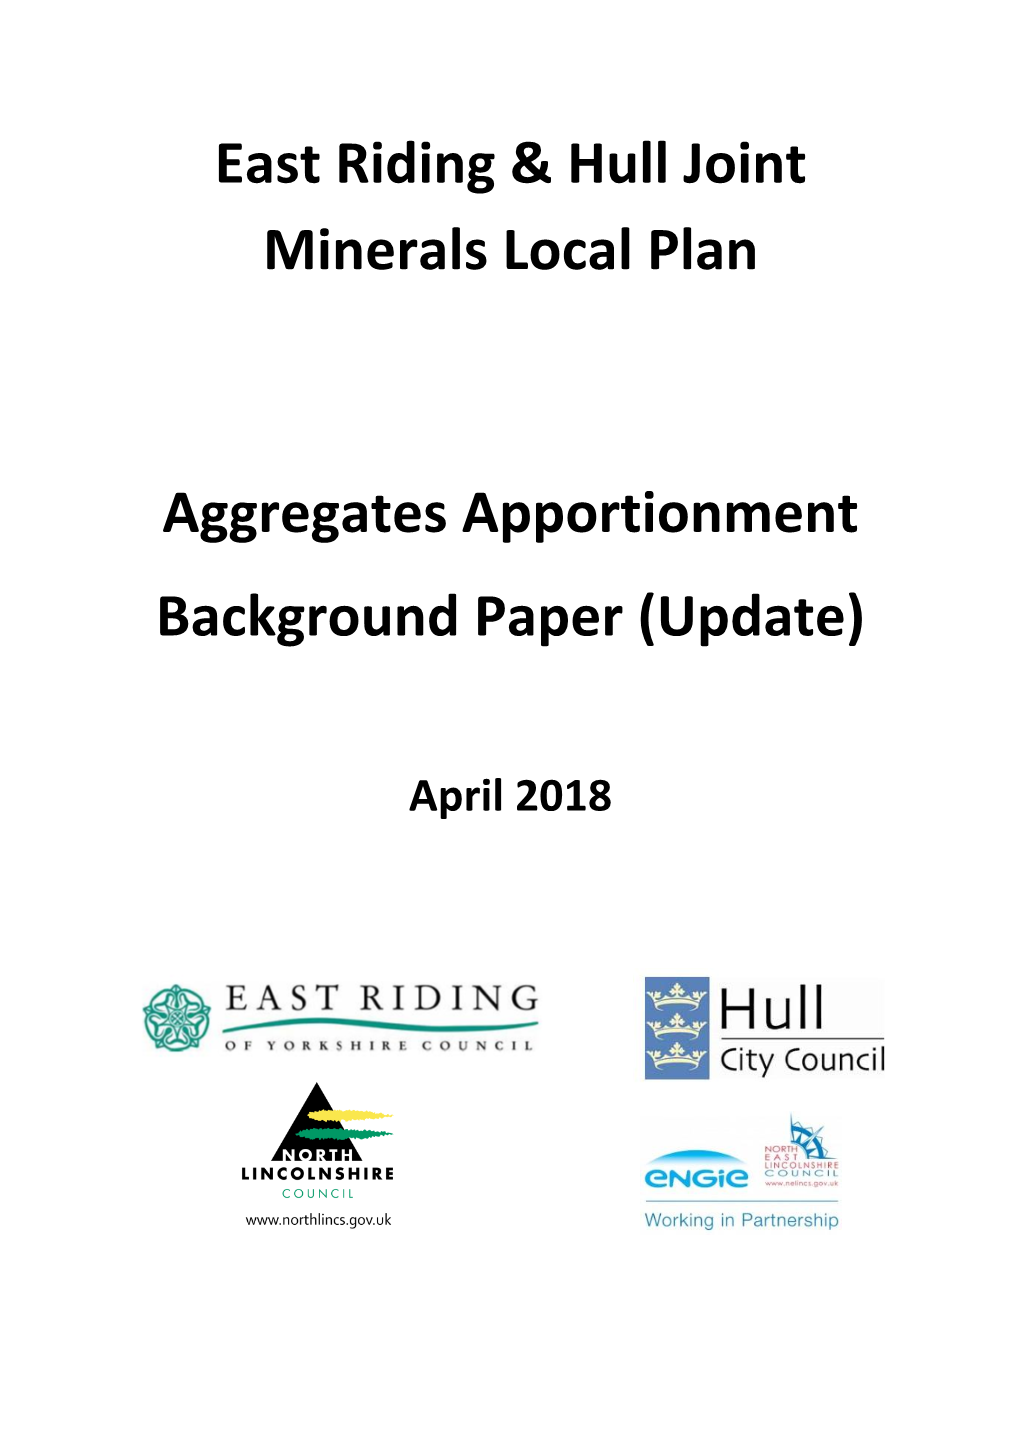 Aggregates Apportionment Background Paper (Update)